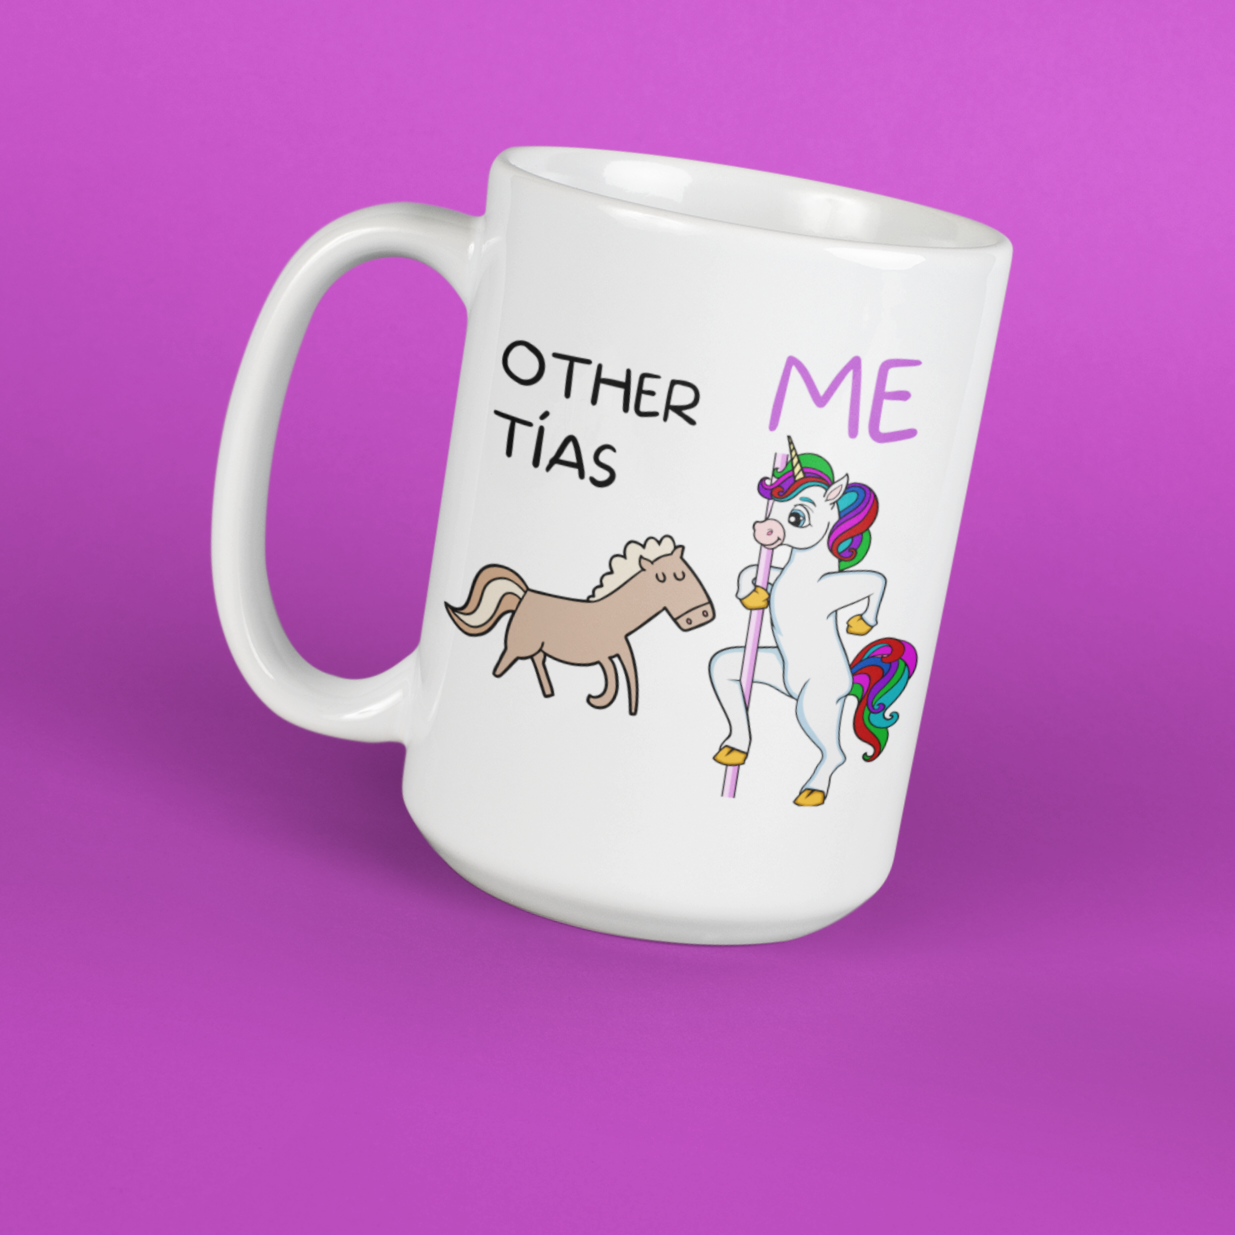 Angled shot of a Funny tall white mug for Latinos and Spanish speakers. The graphic shows a regular cartoon horse with the words "other tias" above it. The other image is a colorful cartoon unicorn on a stripper pole with the word "me" above it.